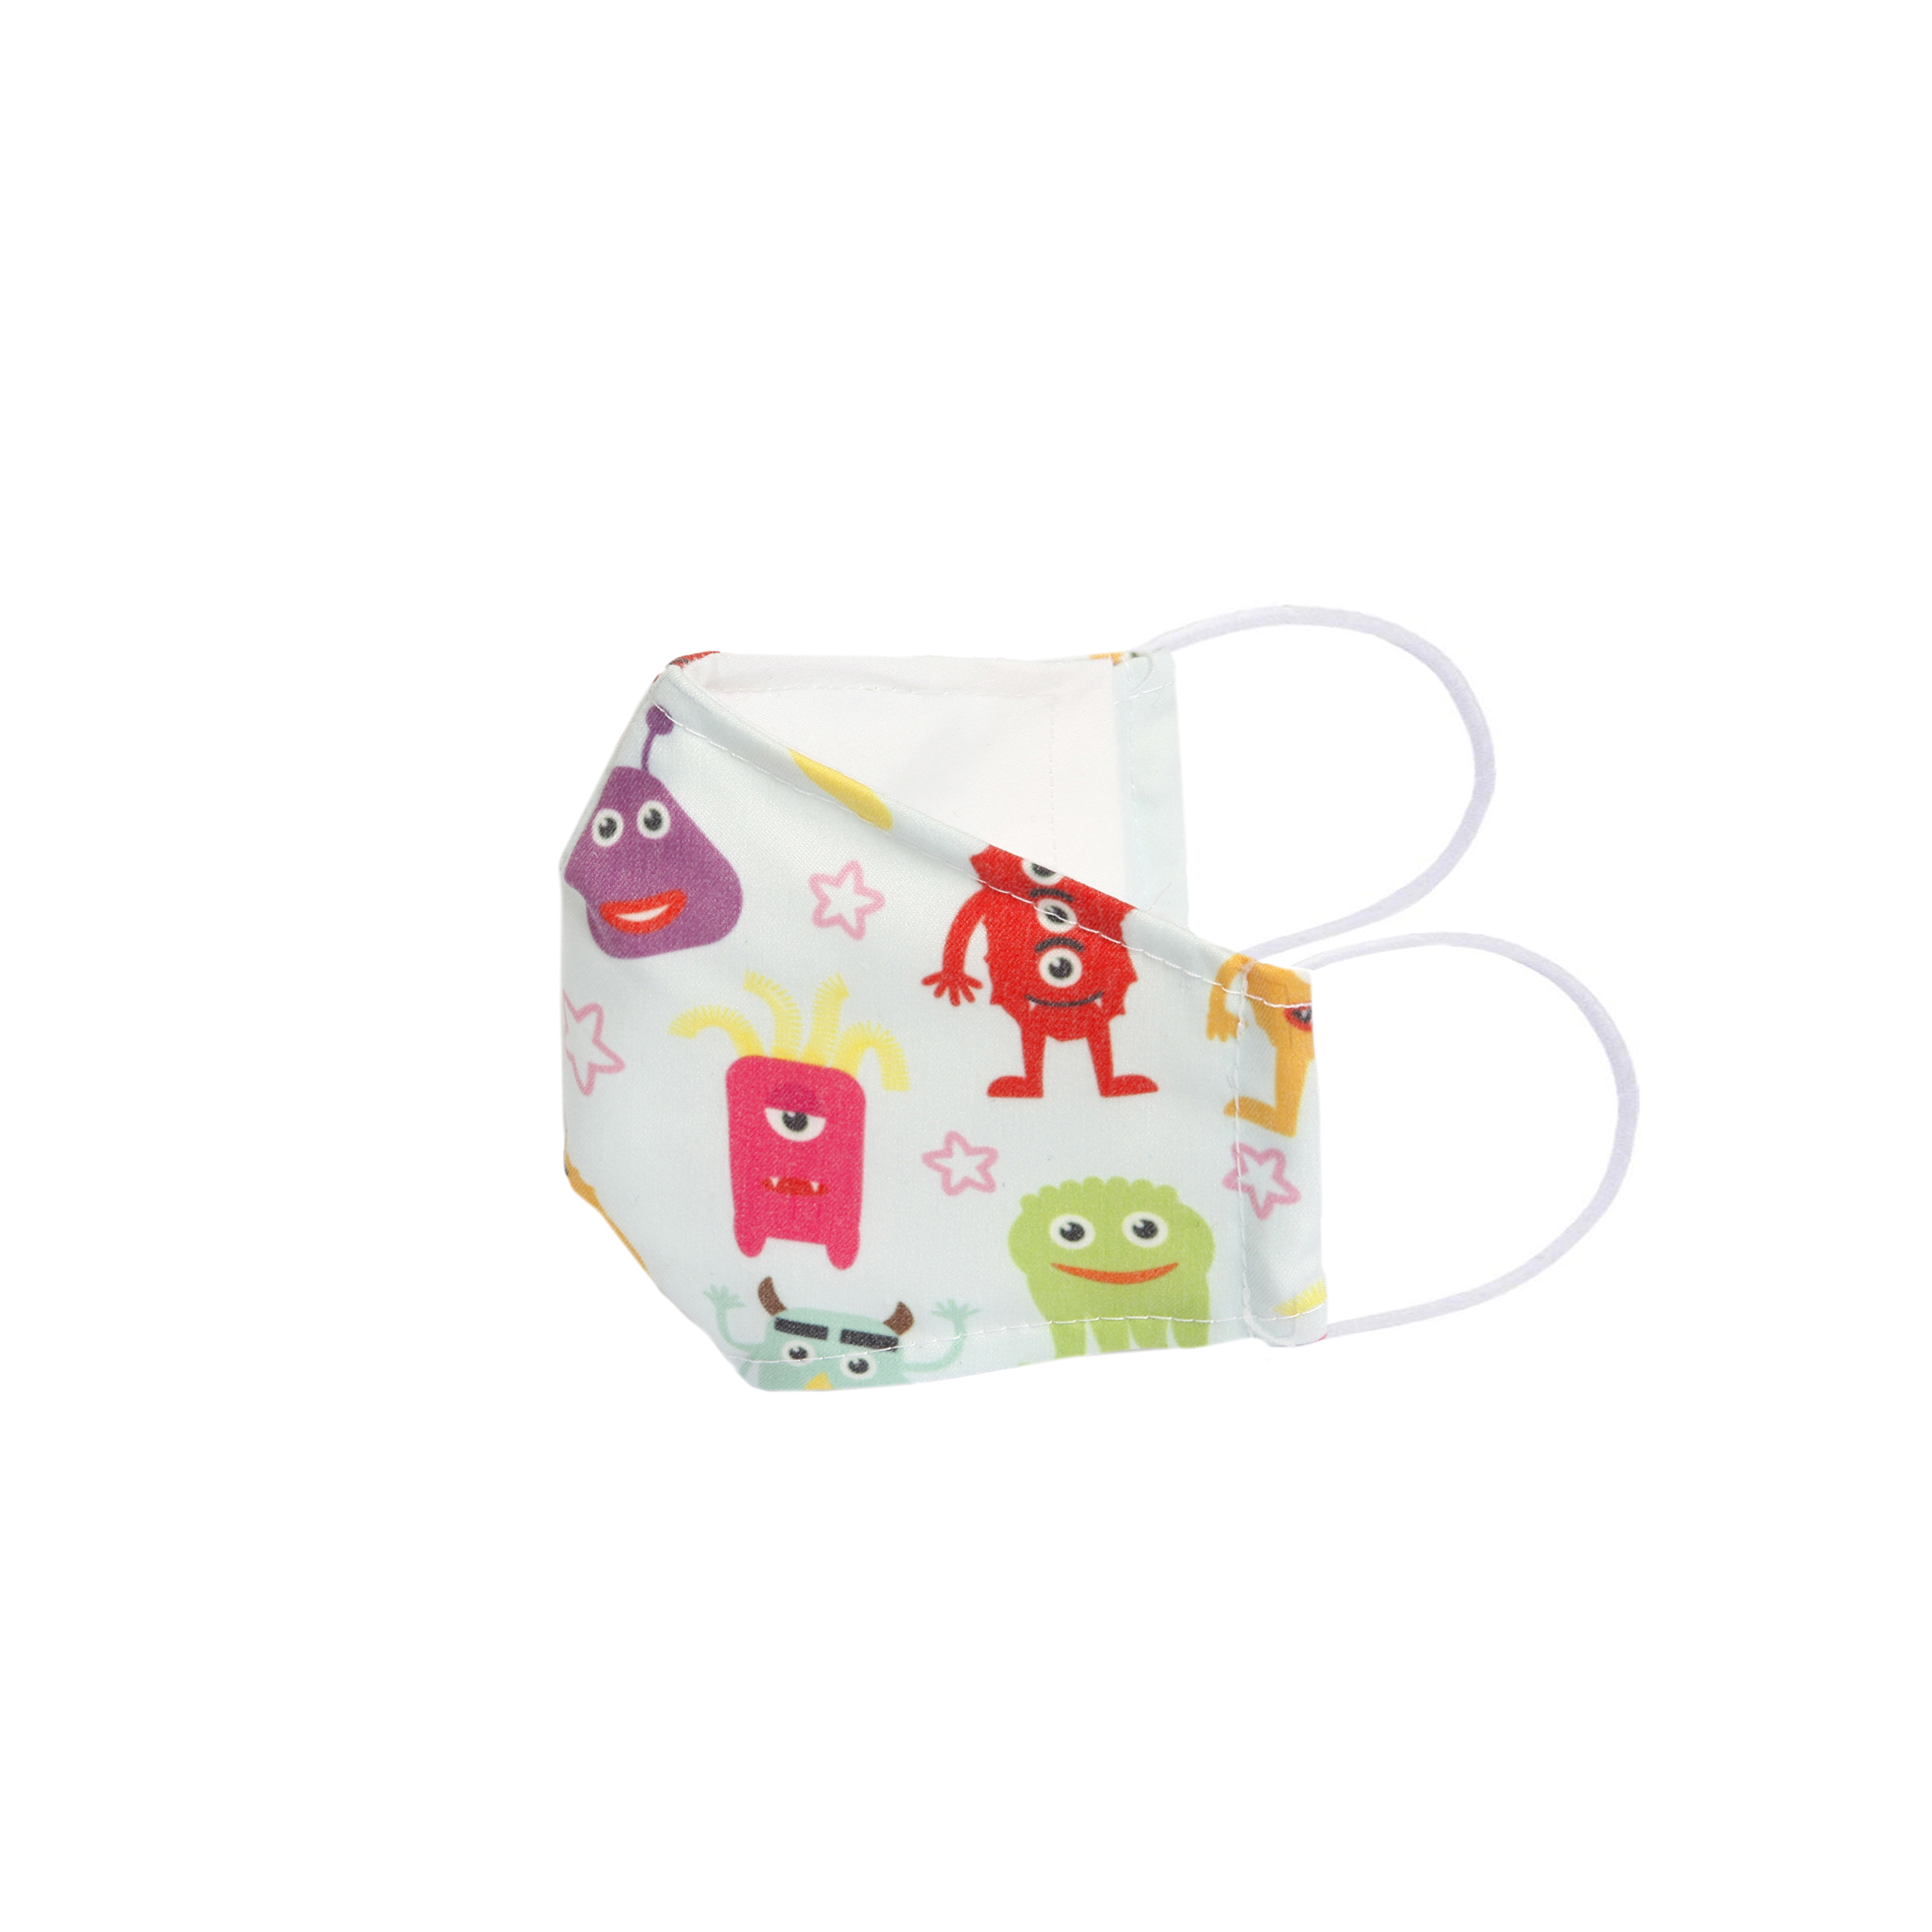 DECORATIVE BREATABLE KIDS FABRIC FACE MASK ALIEN DESIGN WITH FILTER POCKET 